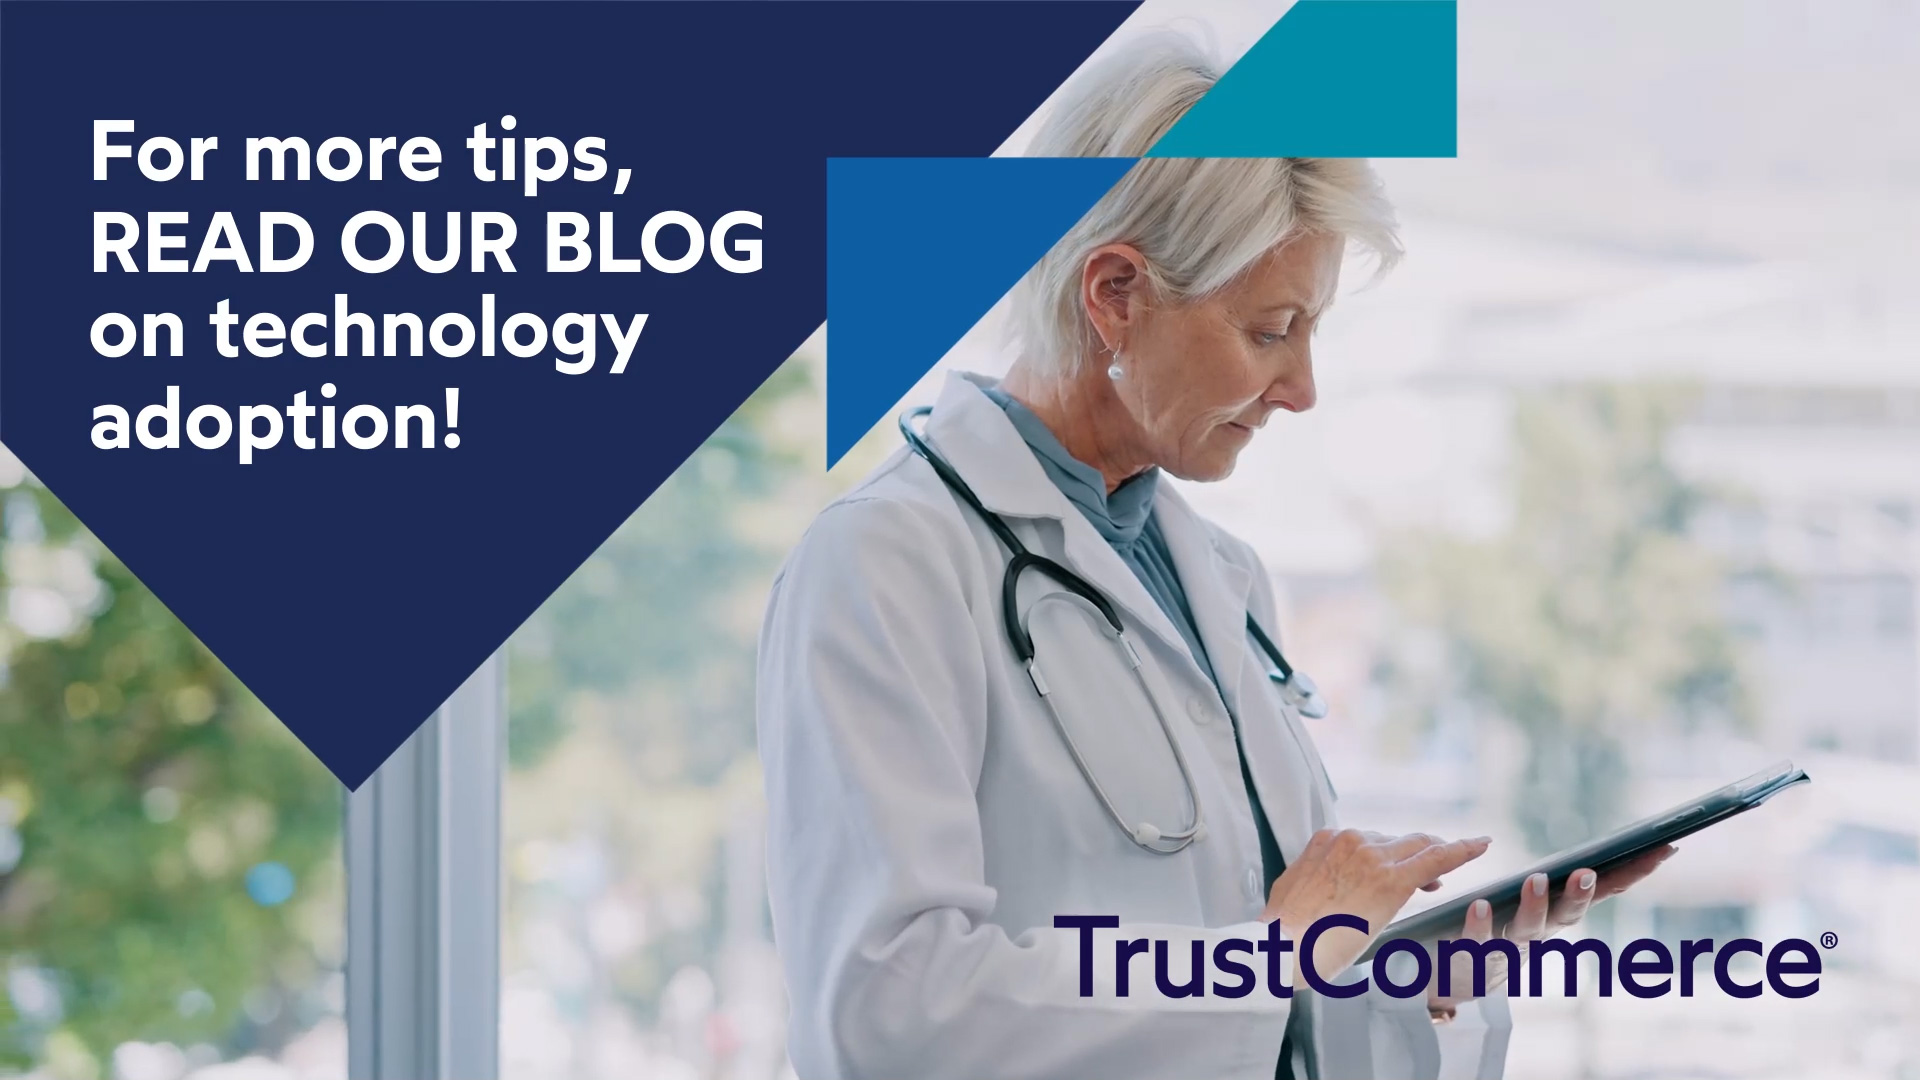 an image of a doctor working on a tablet overlayed with triangle shapes, the TrustCommerce logo, and text that says "For more tips, read our blog on technology adoption!"